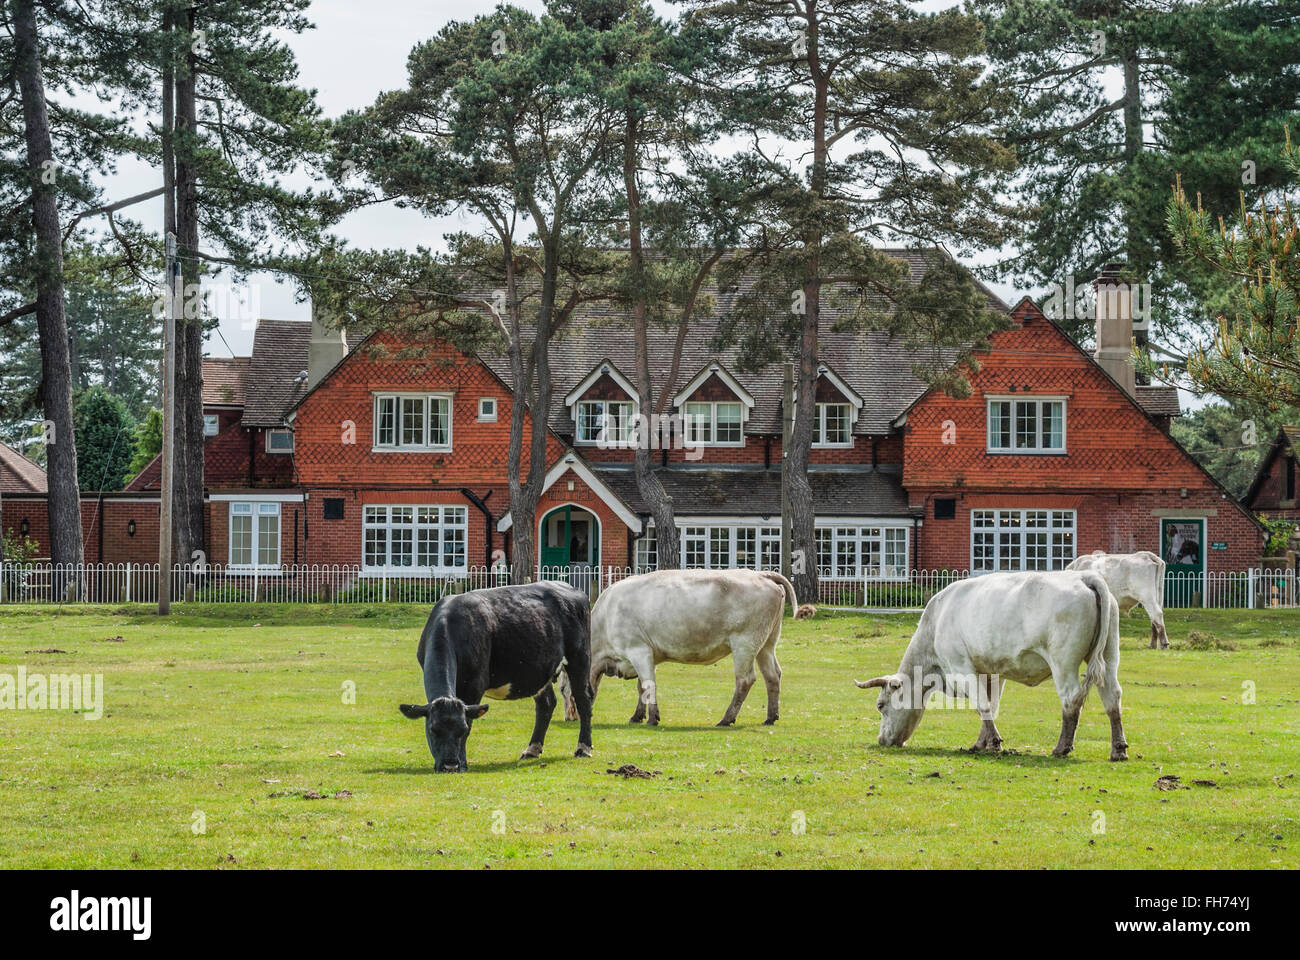 Half Wild Cattle at the New Forest Wildlife Park near Lyndhurst, South East England. Stock Photo